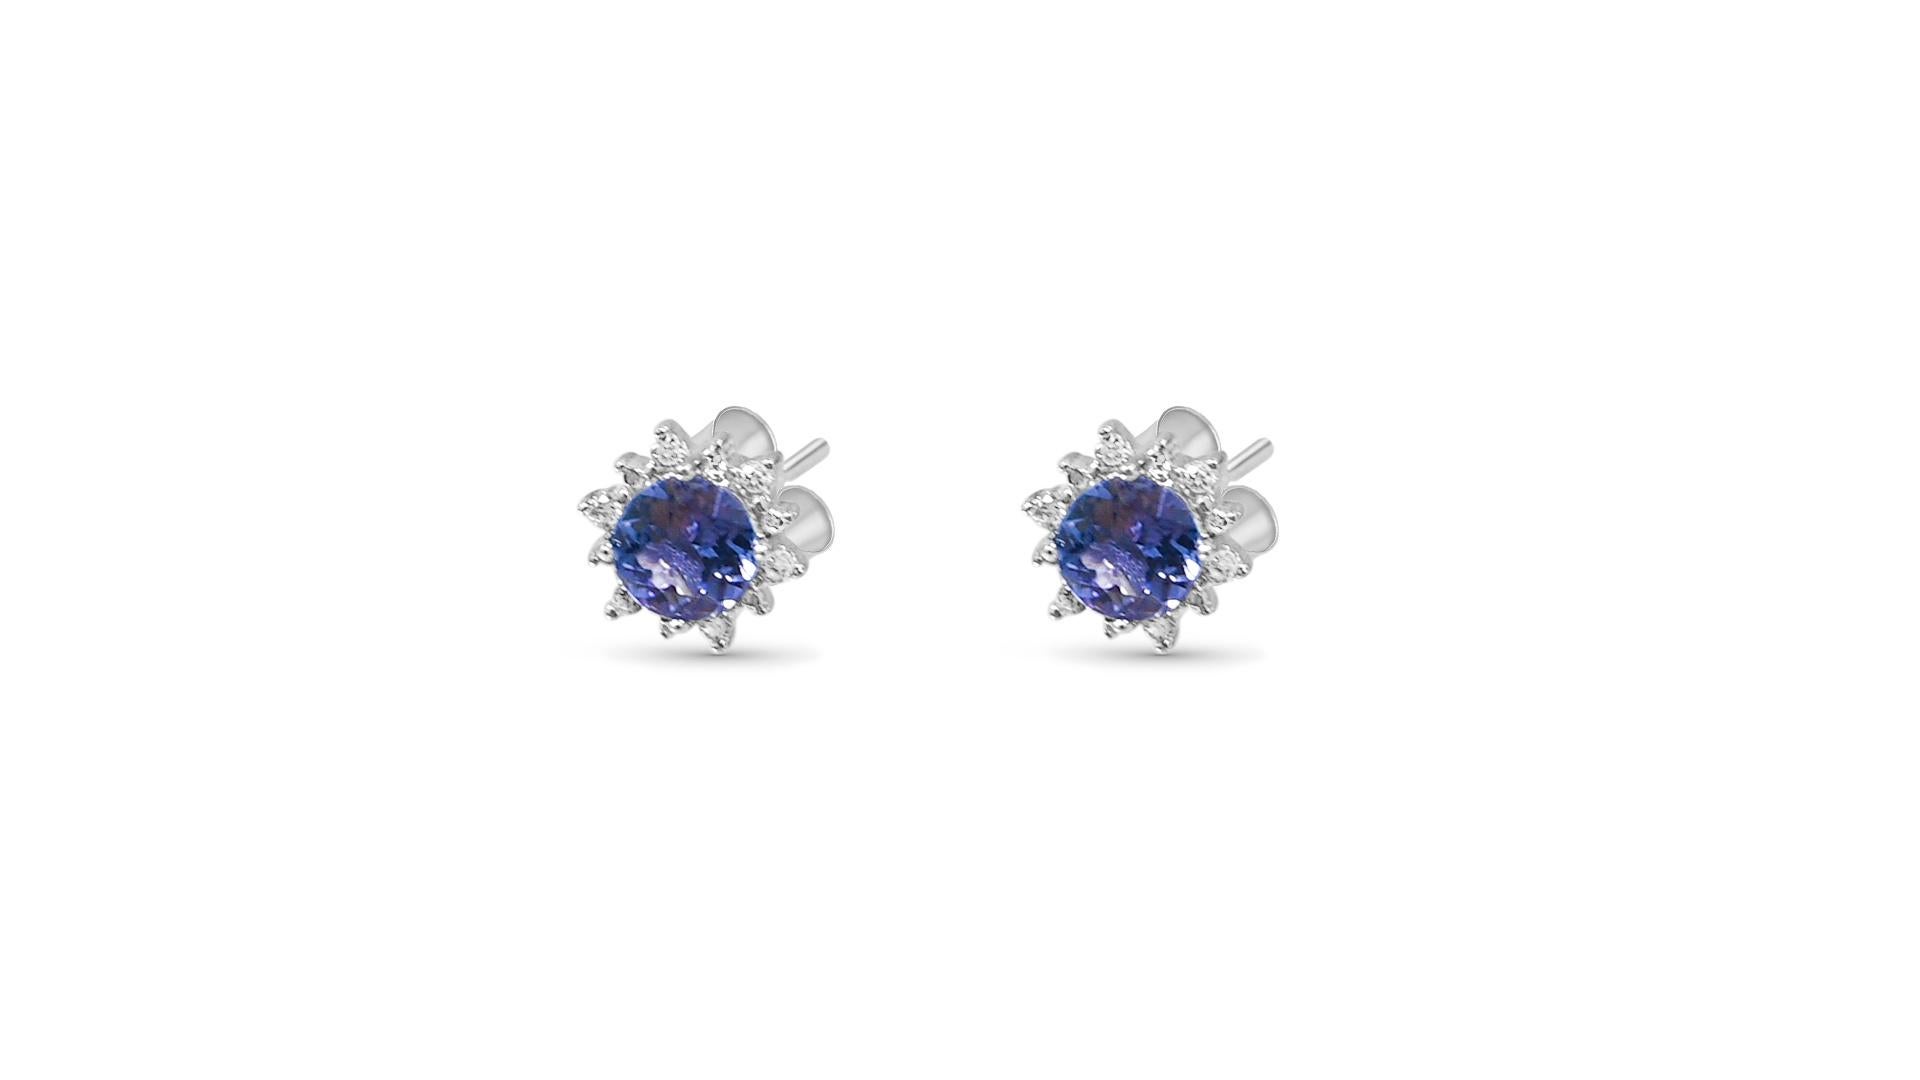 Welcome to Blue Star Gems NY LLC! Discover popular engagement Earrings & wedding Earrings designs from classic to vintage inspired. We offer Joyful jewelry for everyday wear. Just for you. We go above and beyond the current industry standards to